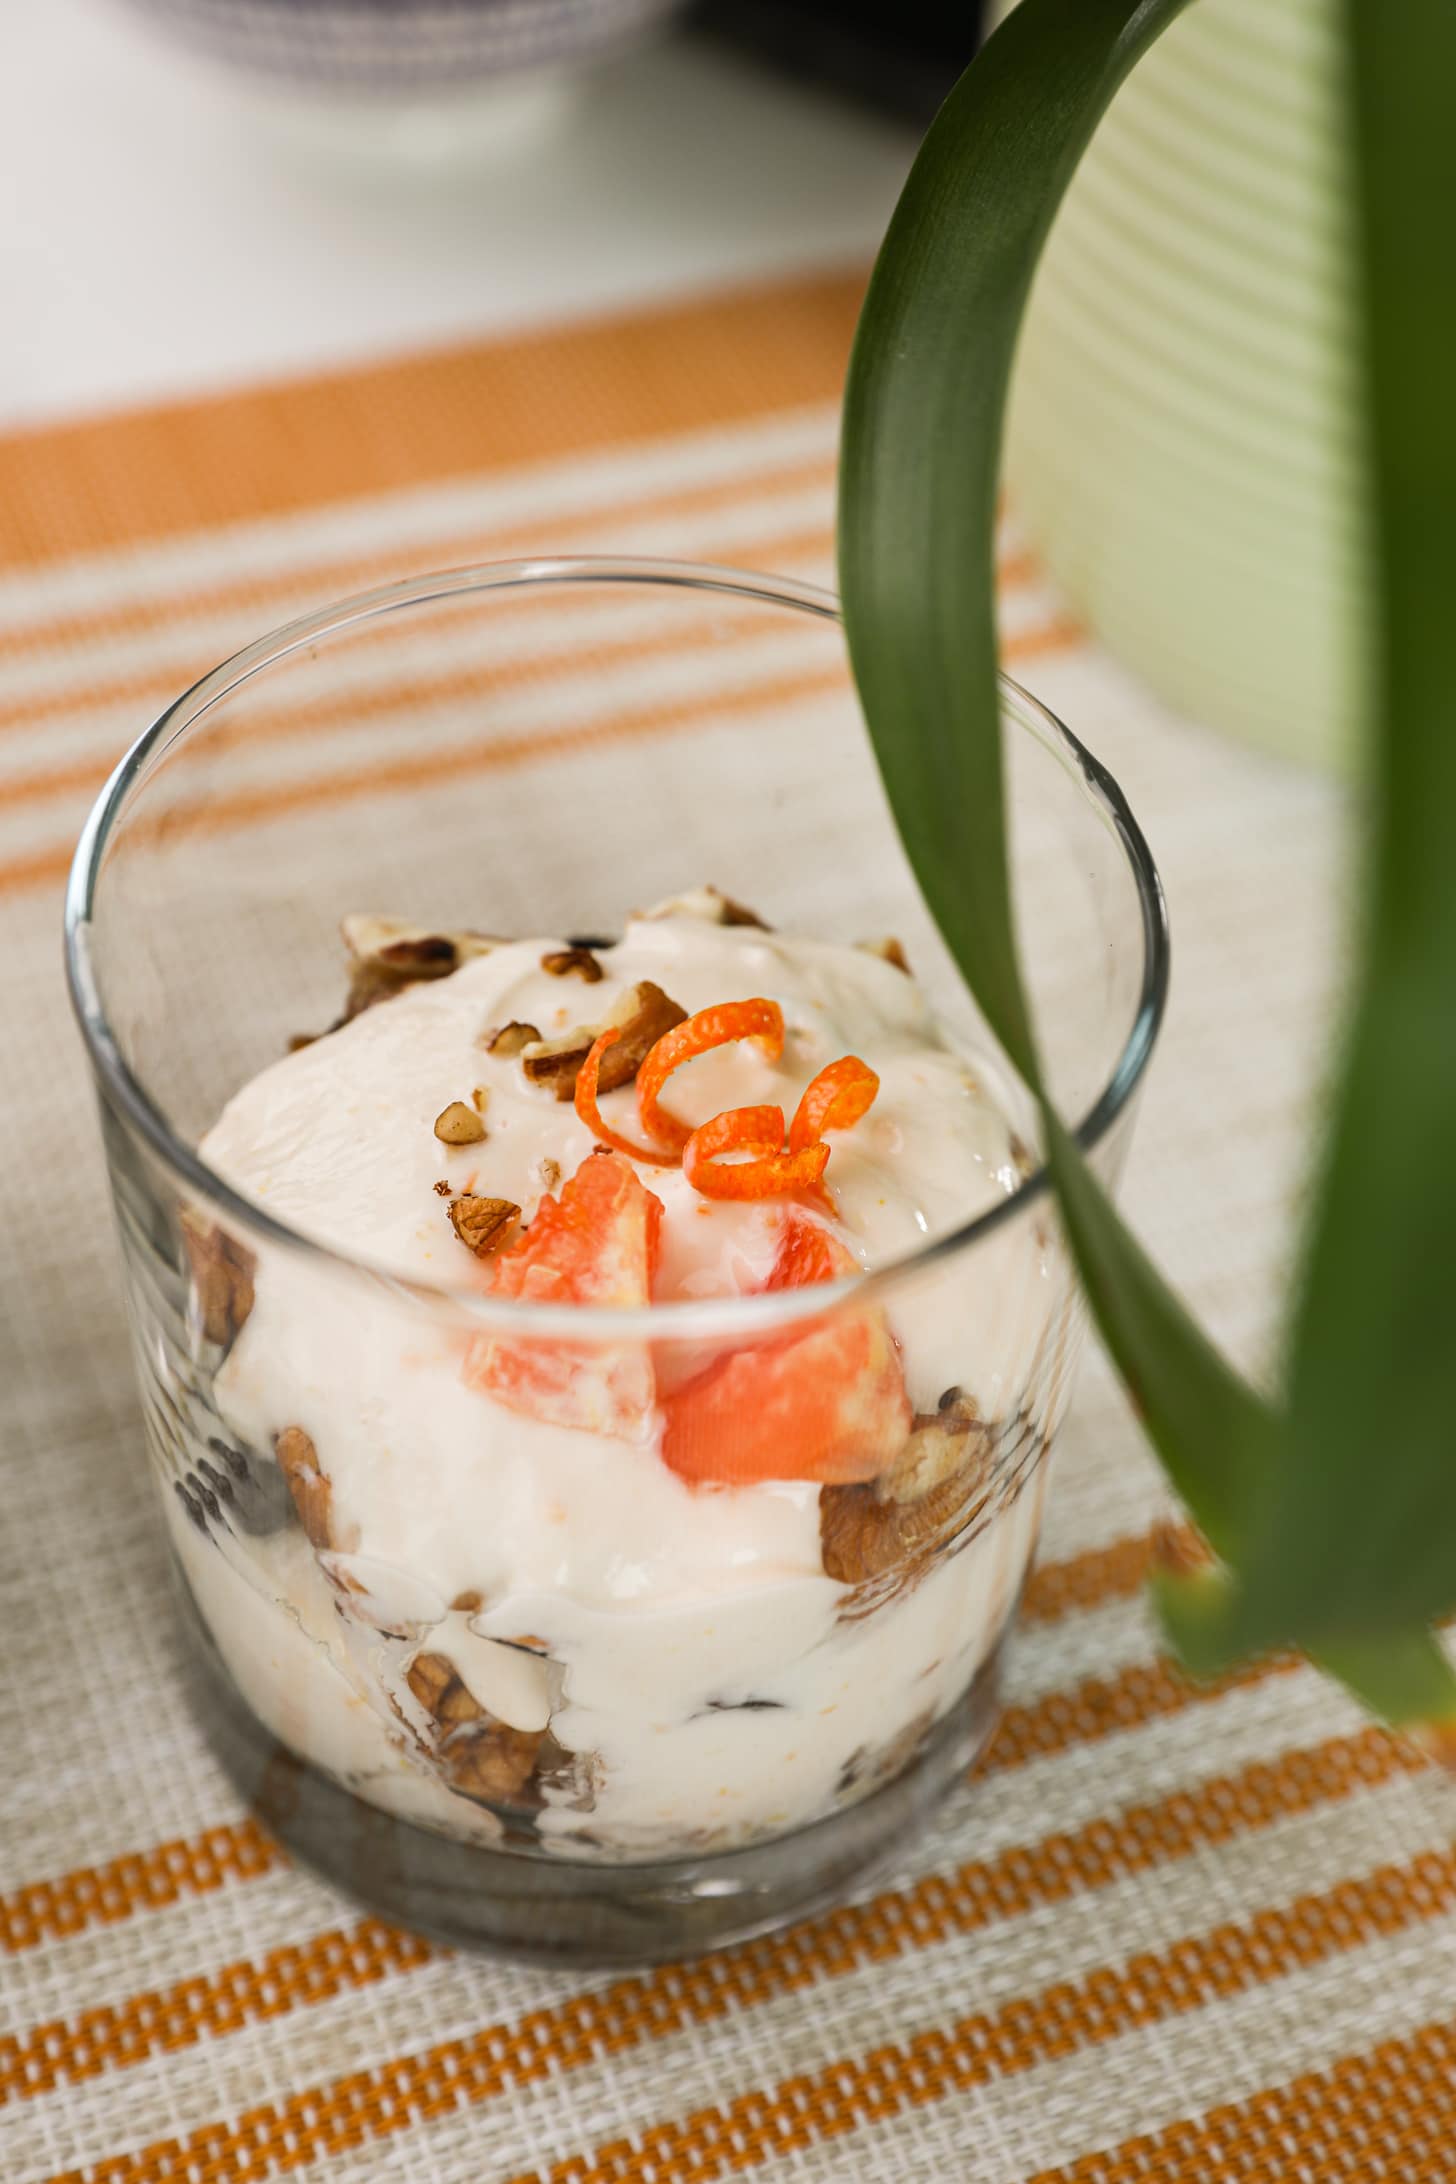 a glass filled with yogurt, topped with crushed nuts, orange rind curls and orange pieces.